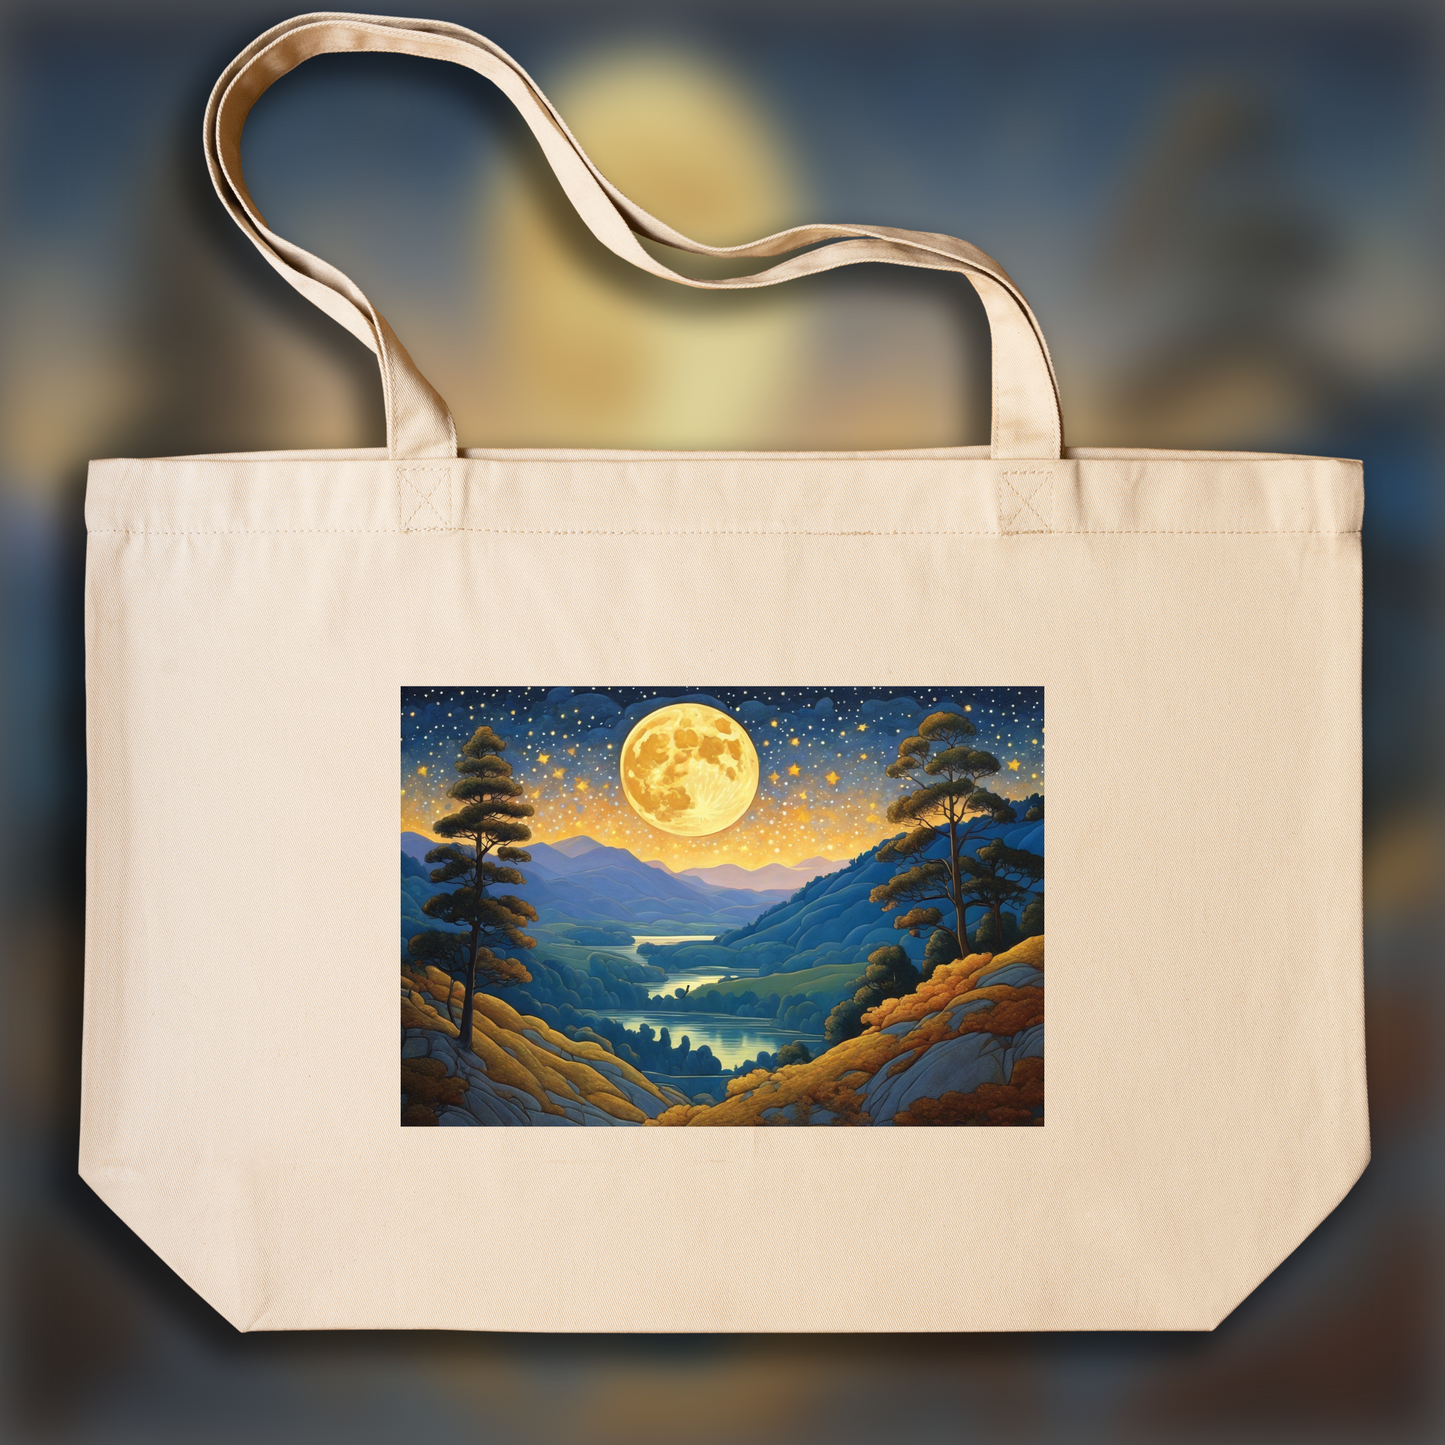 Tote bag - Paul Ranson, Moon and starry sky - 51060819